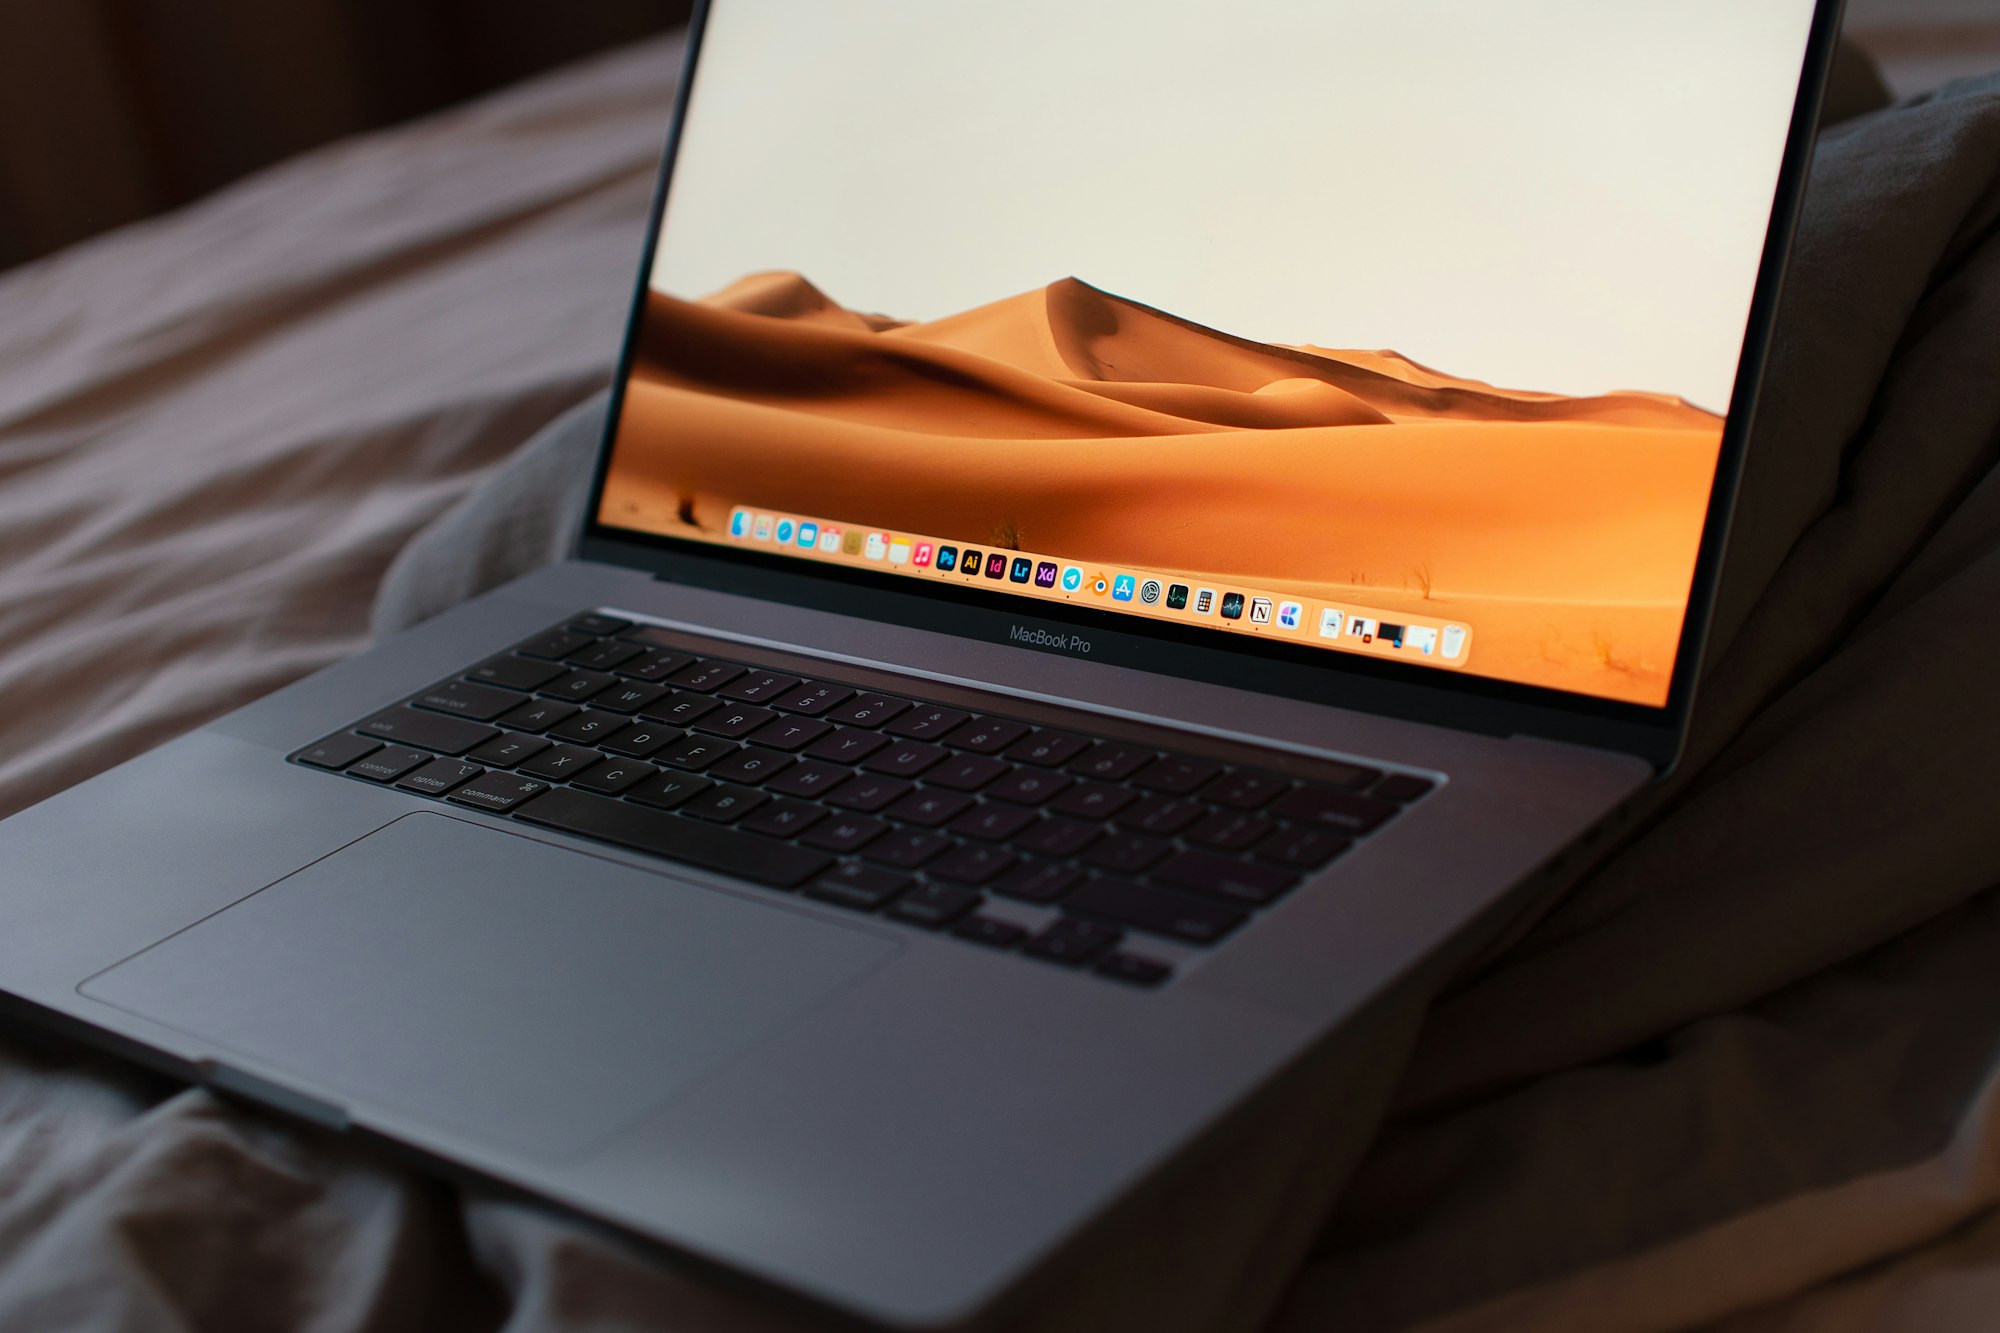 Which Laptop is Better for Programming Mac or Windows?